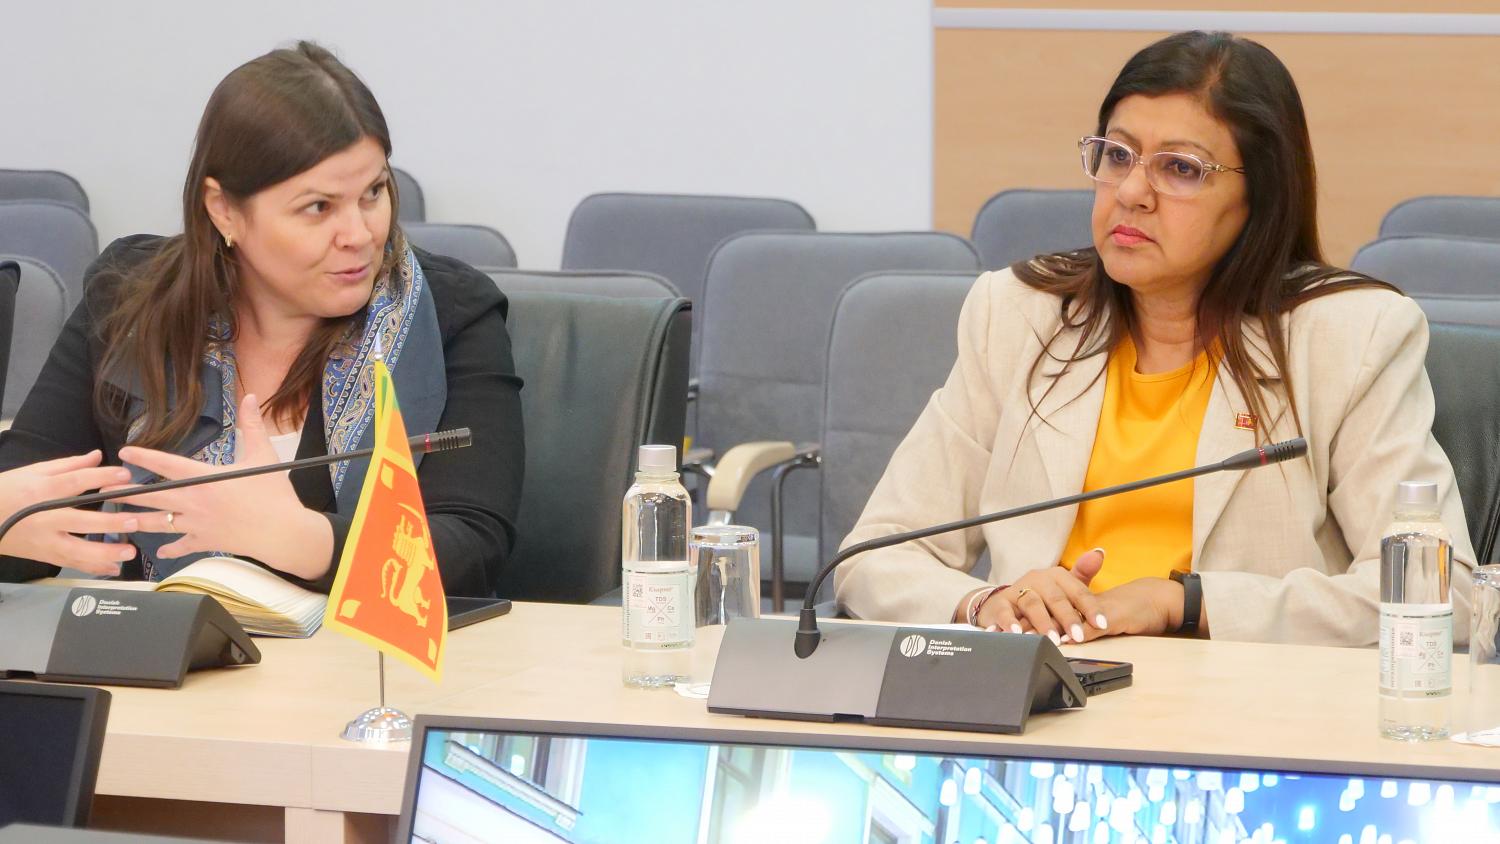 Representatives of the light industry of Russia and Sri Lanka discussed possibilities for developing cooperation